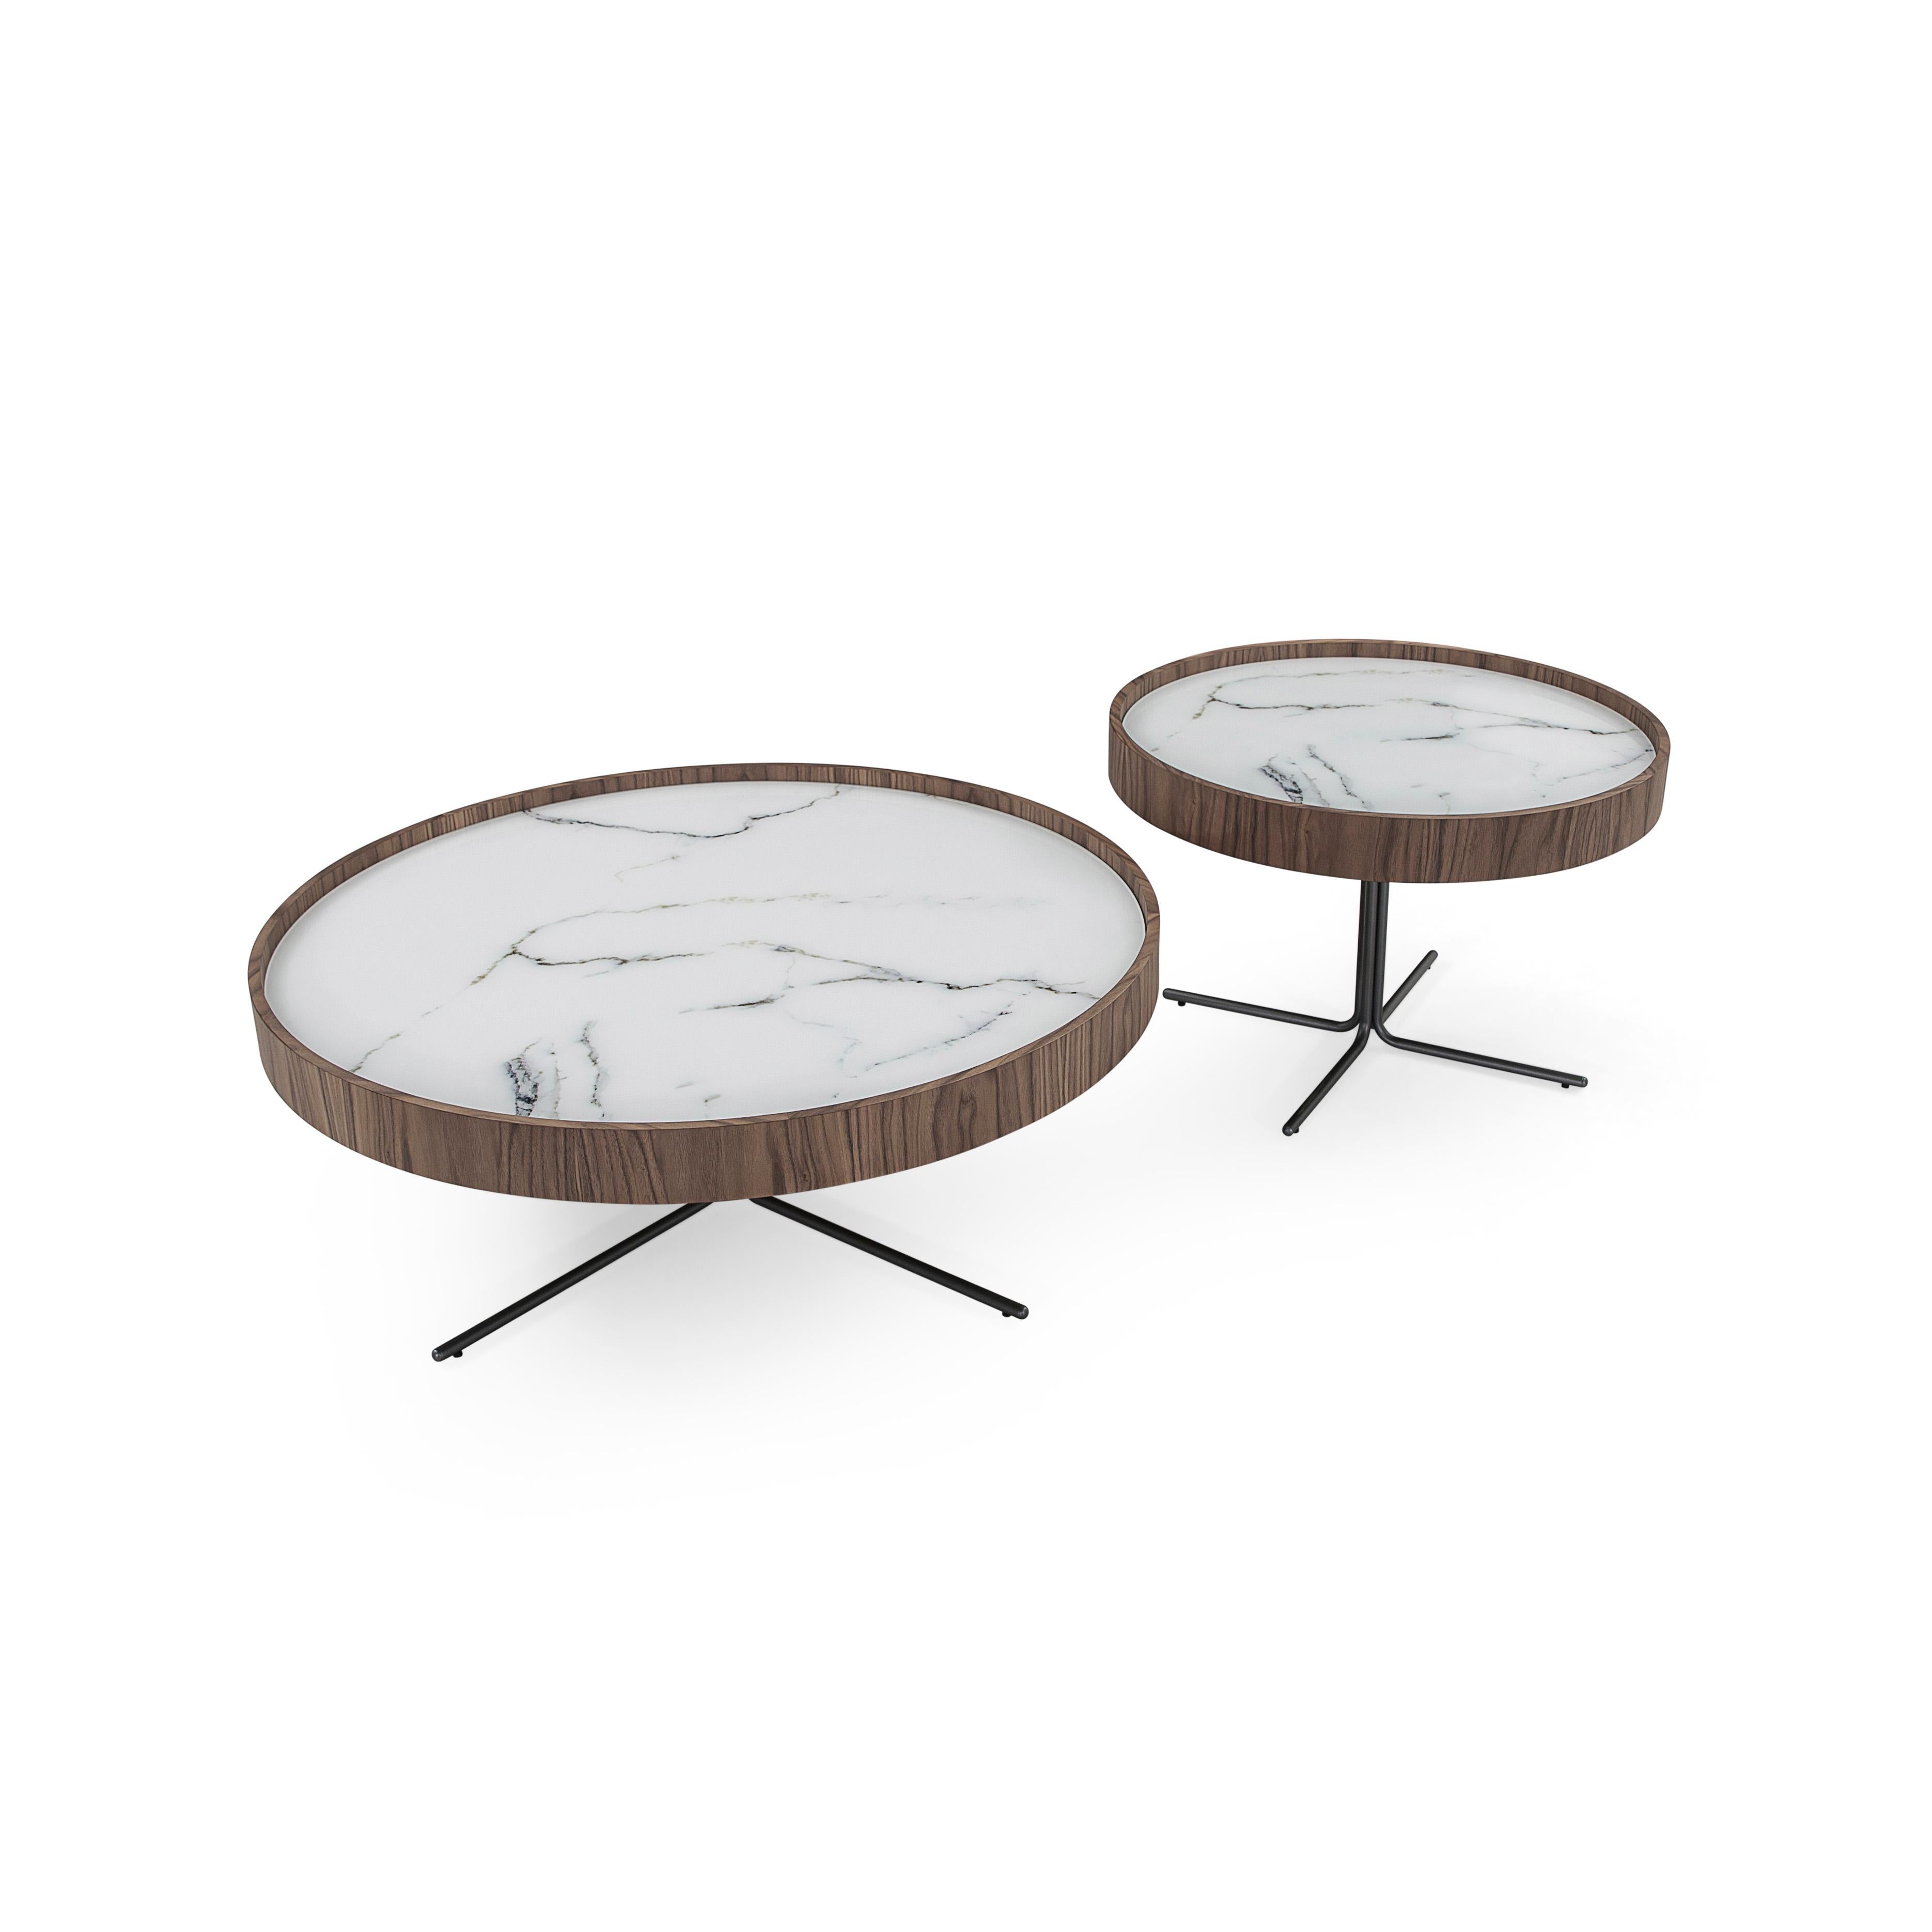 Regia Occasional Table in Walnut Wood Finish Featuring White Glass, Set of 2 In New Condition For Sale In Miami, FL